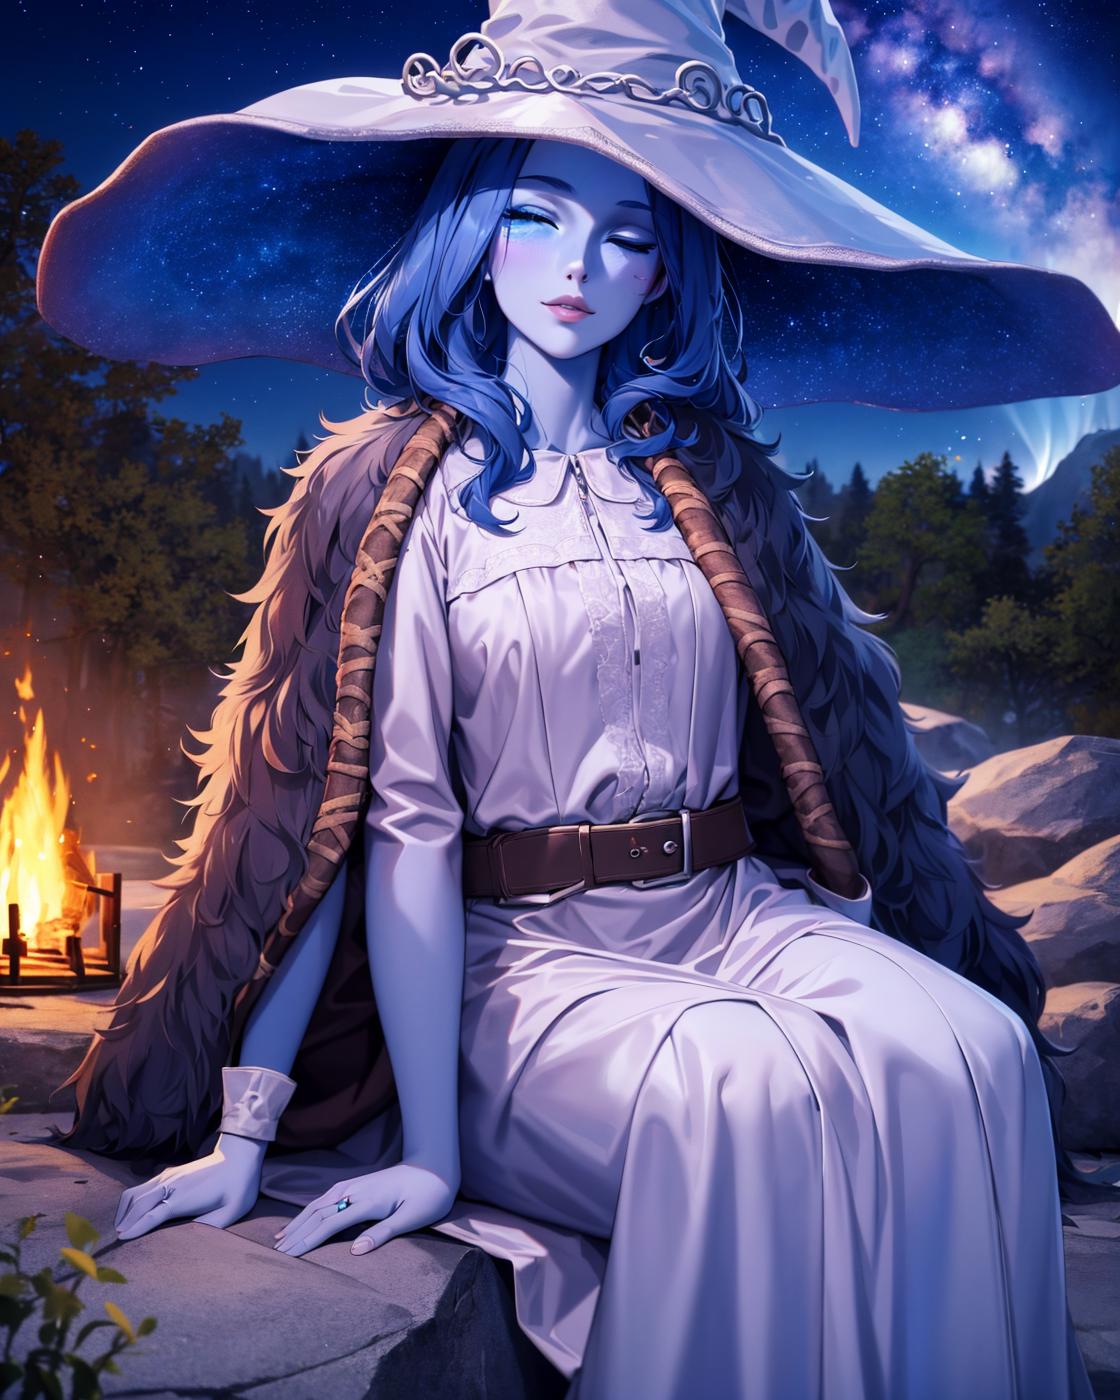 Elden Ring Ranni The Witch image by binnng